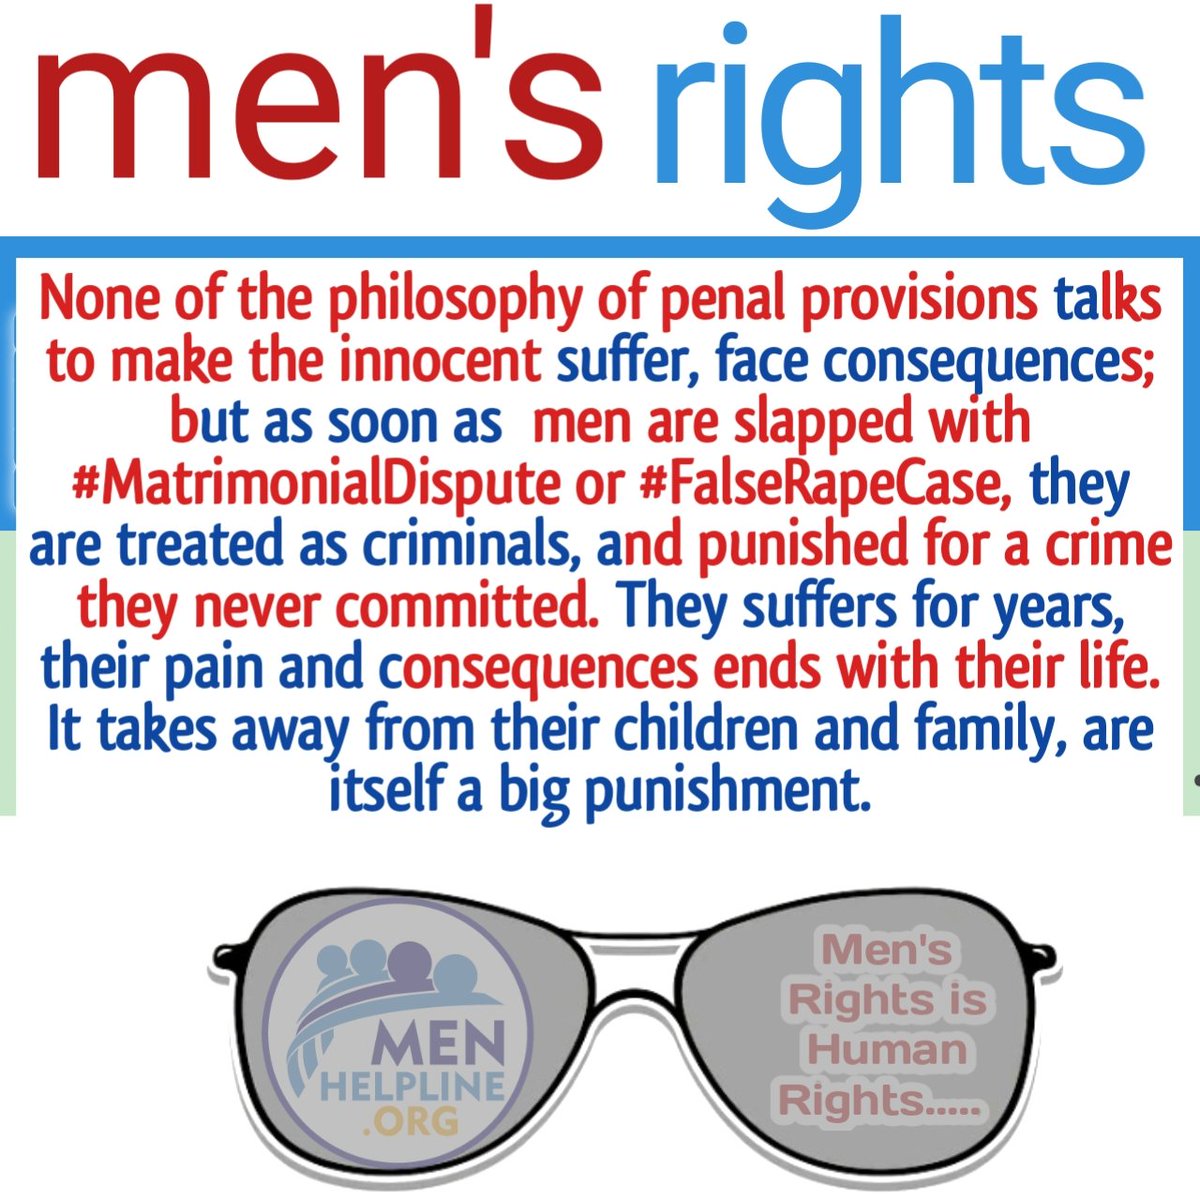 None of the philosophy of penal provisions talks to make the INNOCENT suffer but Men suffers as soon as the slapped with #MatrimonialDispute or #FALSERAPECASE

WE DEMAND TO STOP HARASSING MEN IN THE NAME OF #WOMENEMPOWERMENT

#mensrights 
#NarendraModi #ParentalAlienation